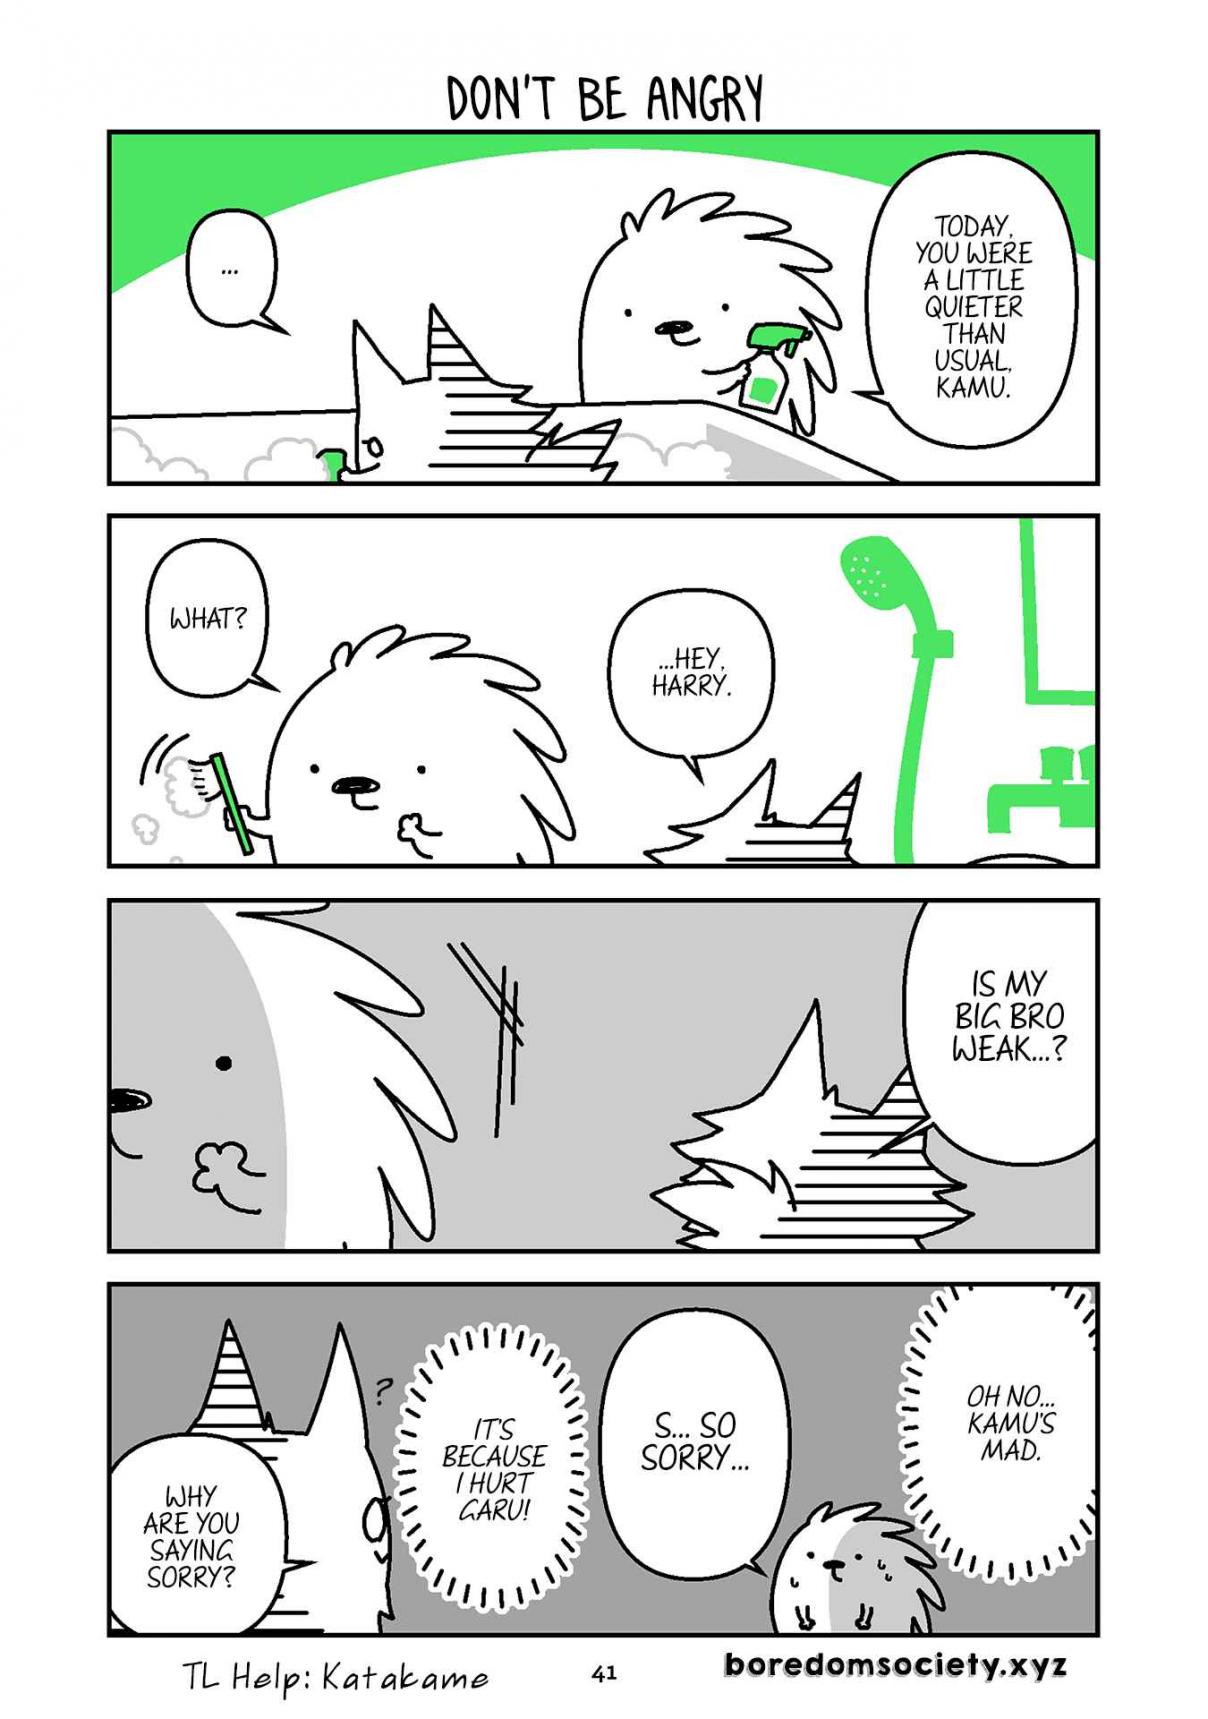 Hedgehog Harry Vol. 2 Ch. 142 Don't Be Angry